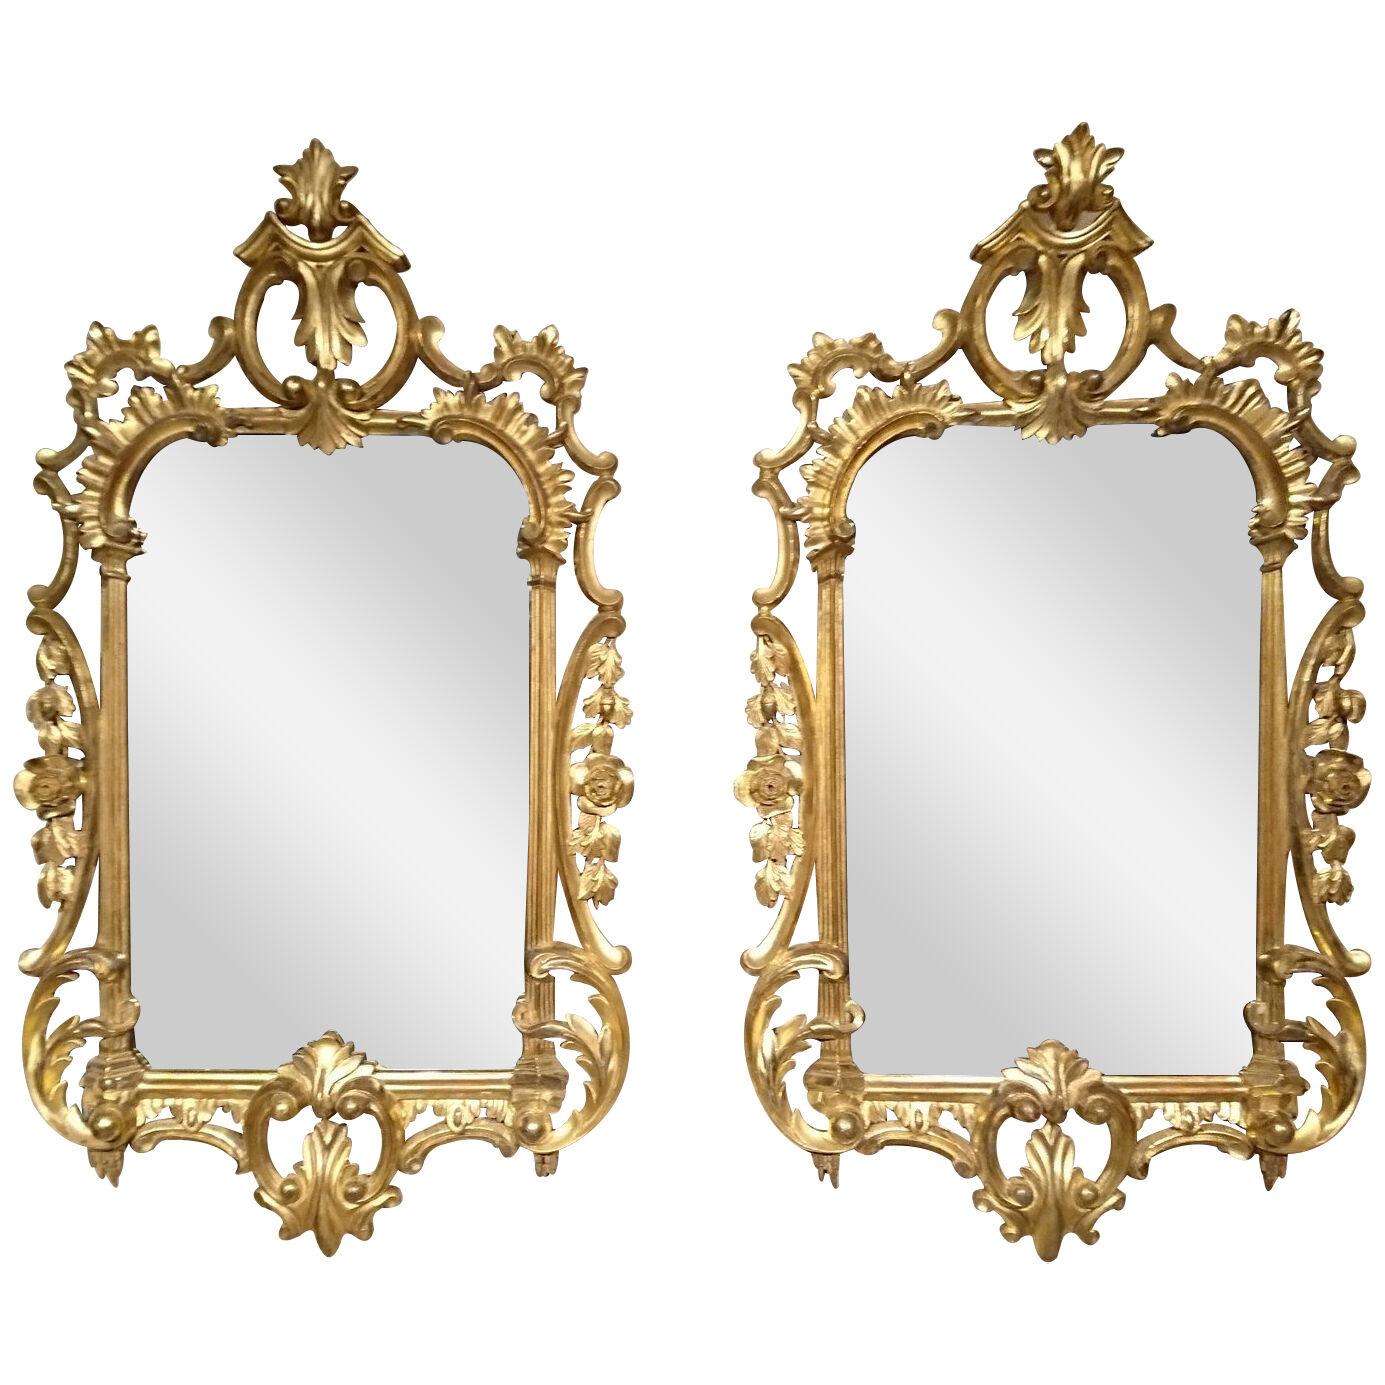 Pair of early 19th century carved and giltwood wall mirrors